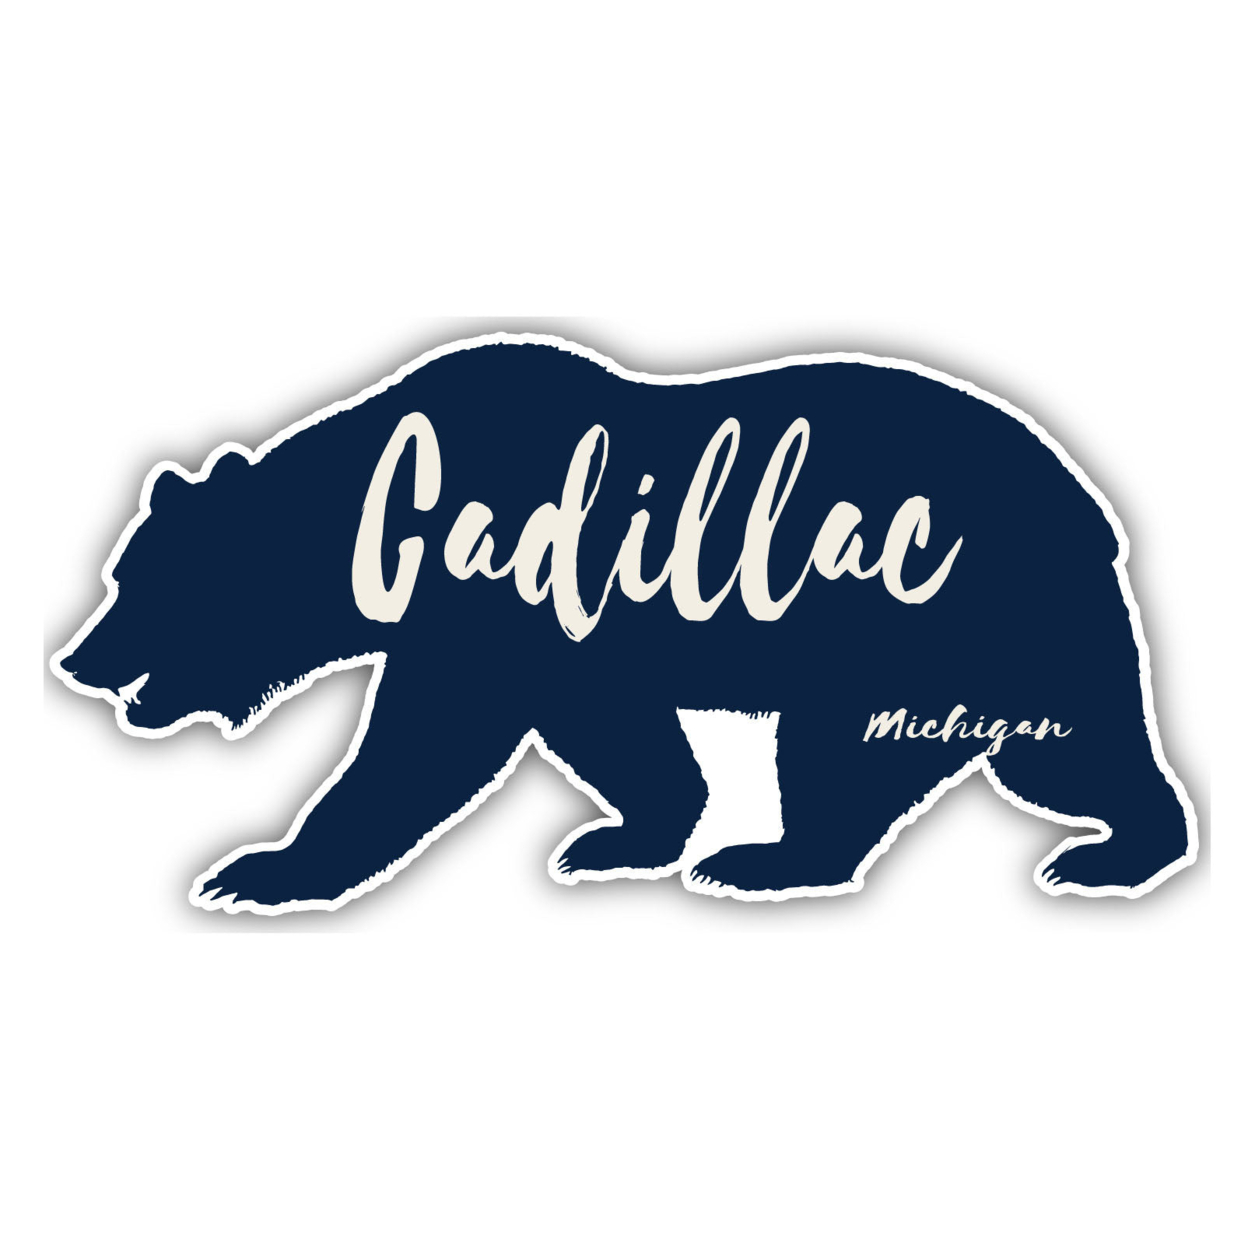 Cadillac Michigan Souvenir Decorative Stickers (Choose Theme And Size) - 4-Pack, 12-Inch, Great Outdoors